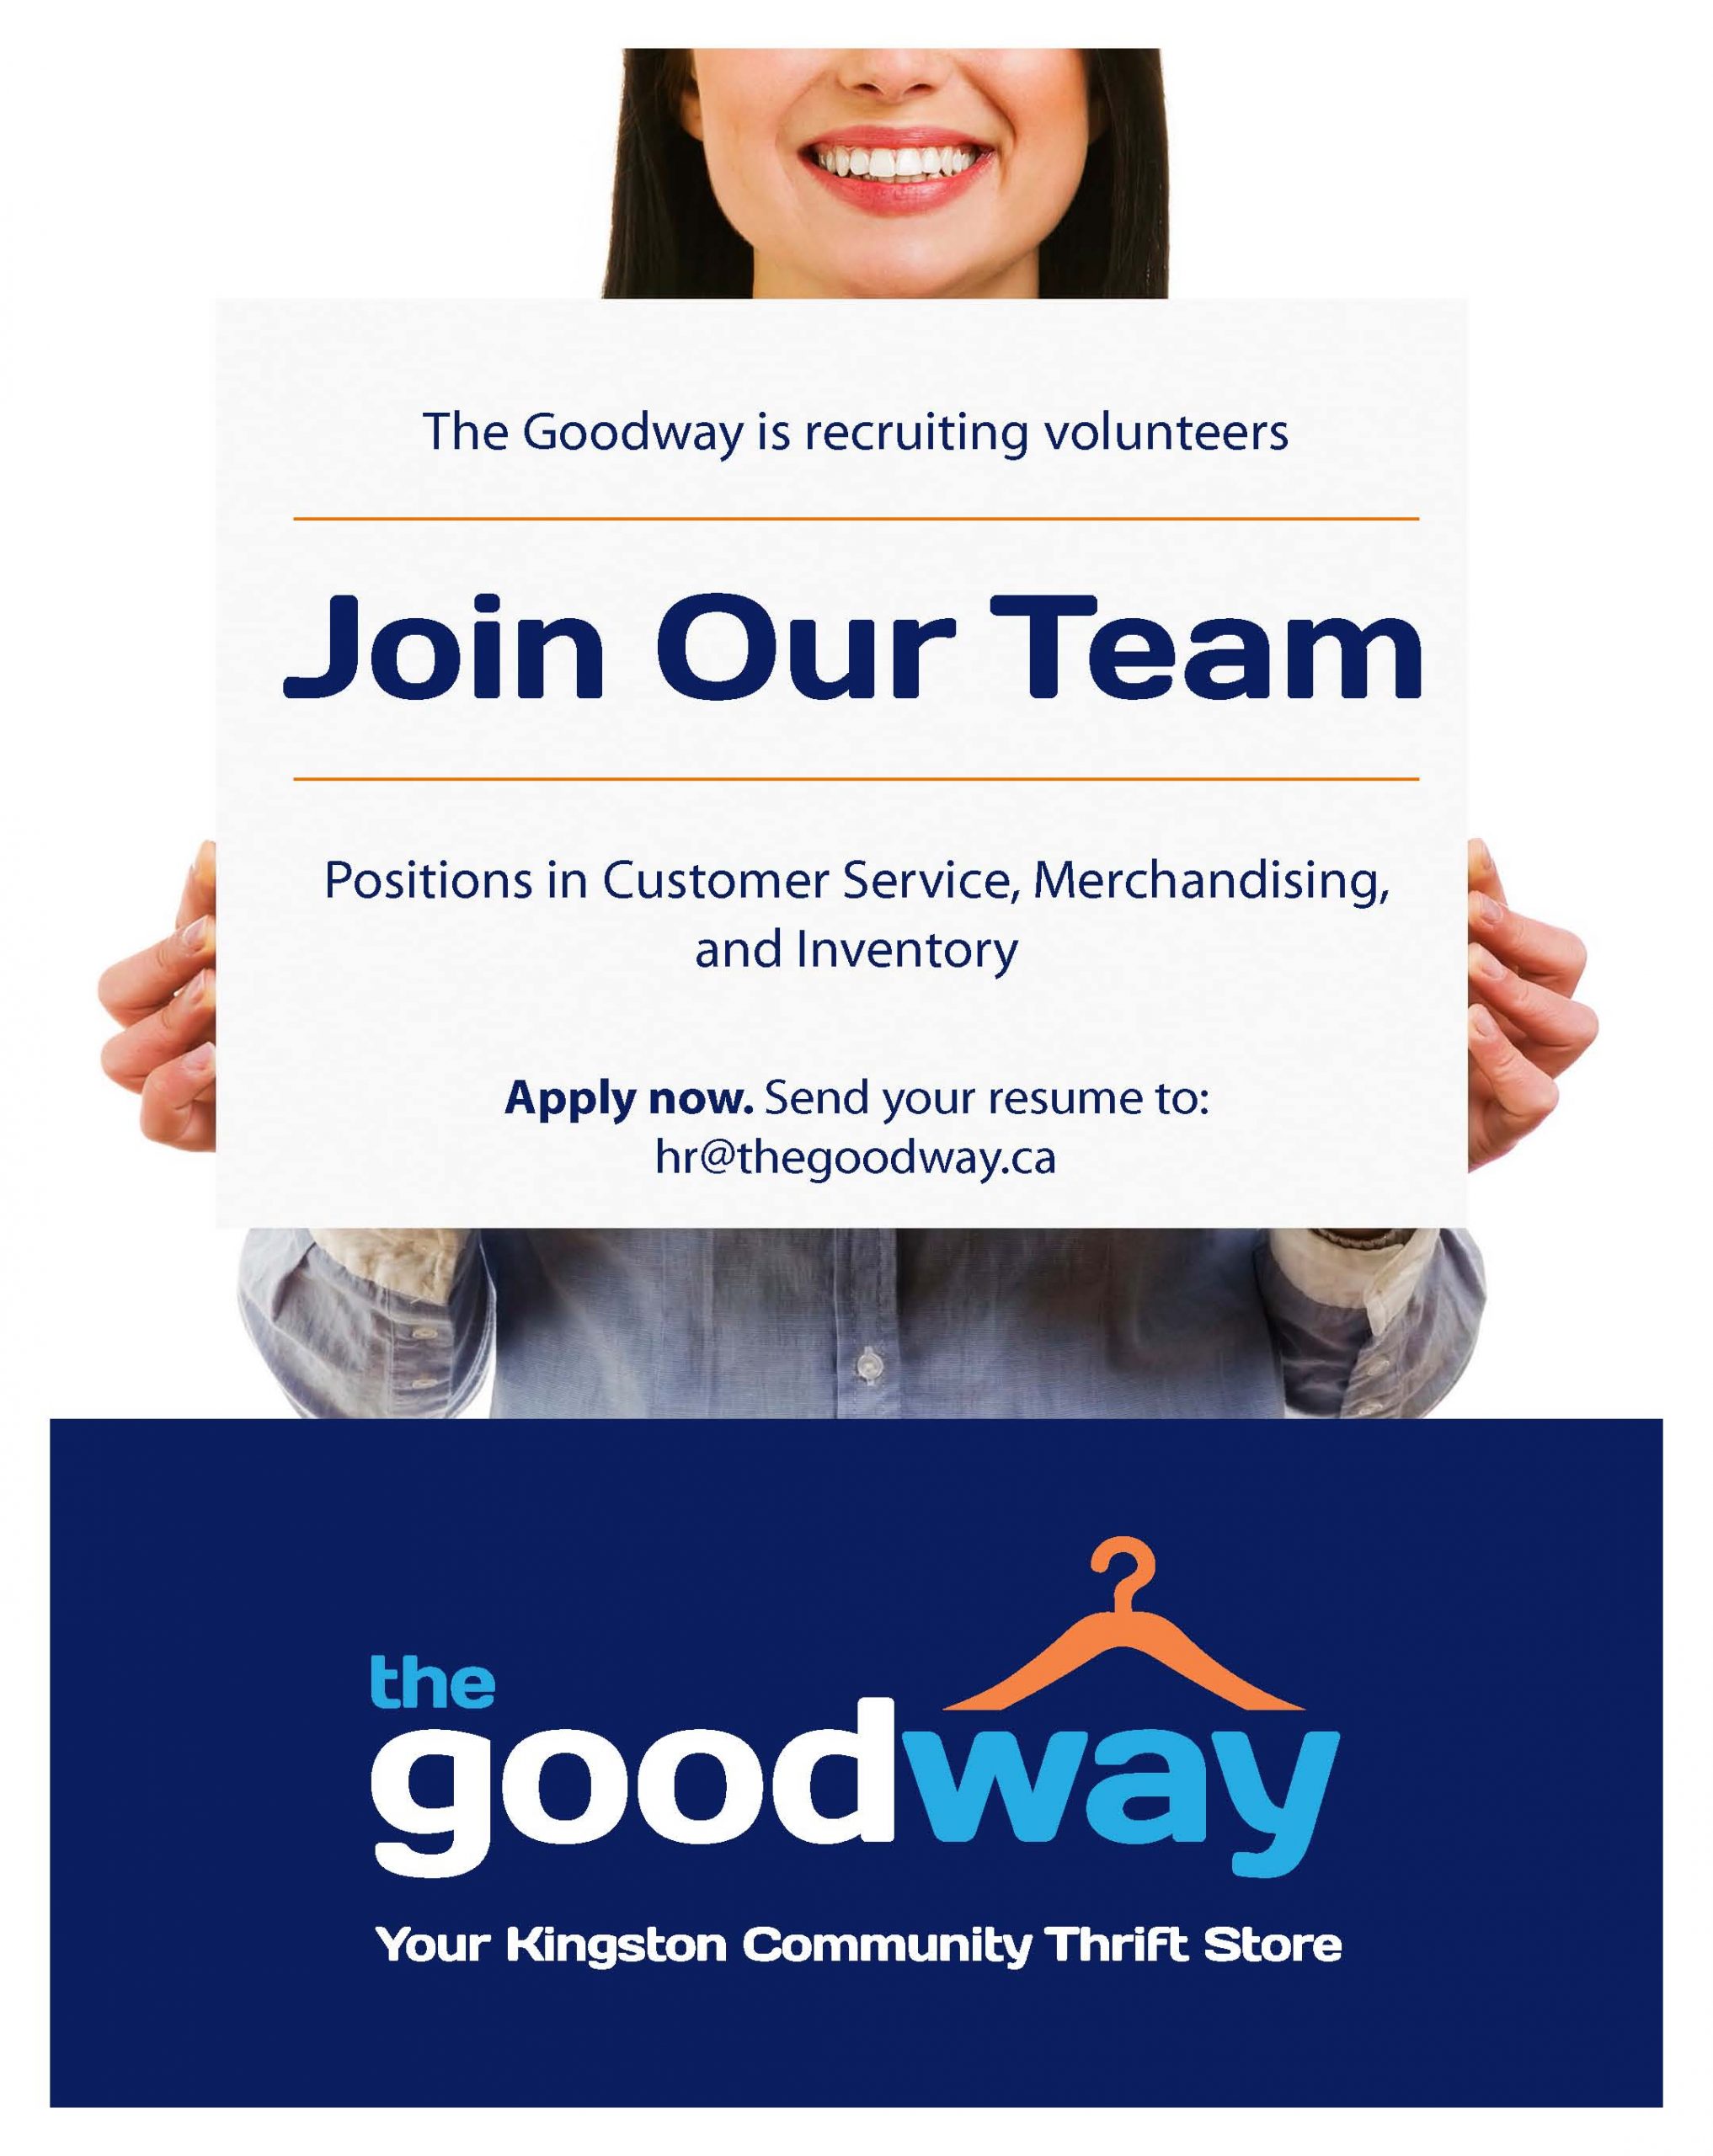 The New Goodway Thrift Store Needs Volunteers!